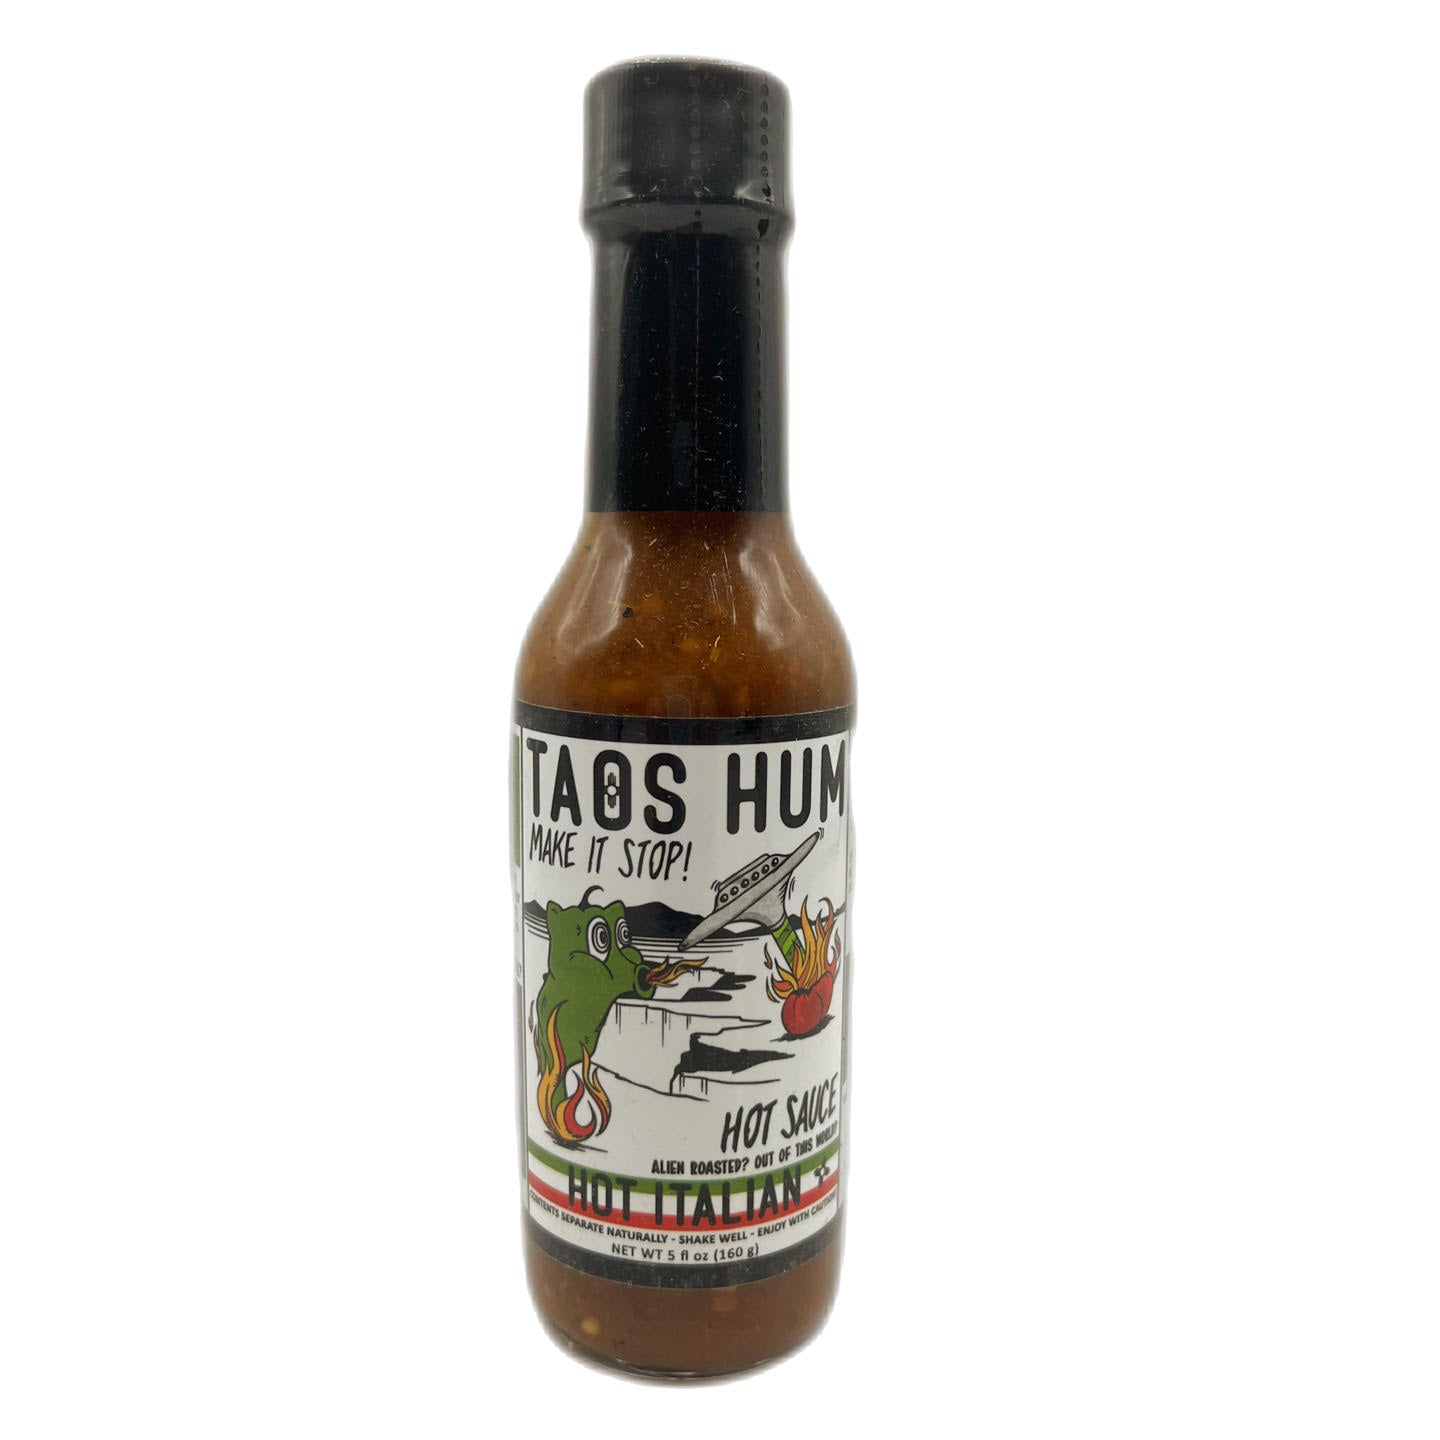 Some Like It Hot! Make Your Own Hot Sauce